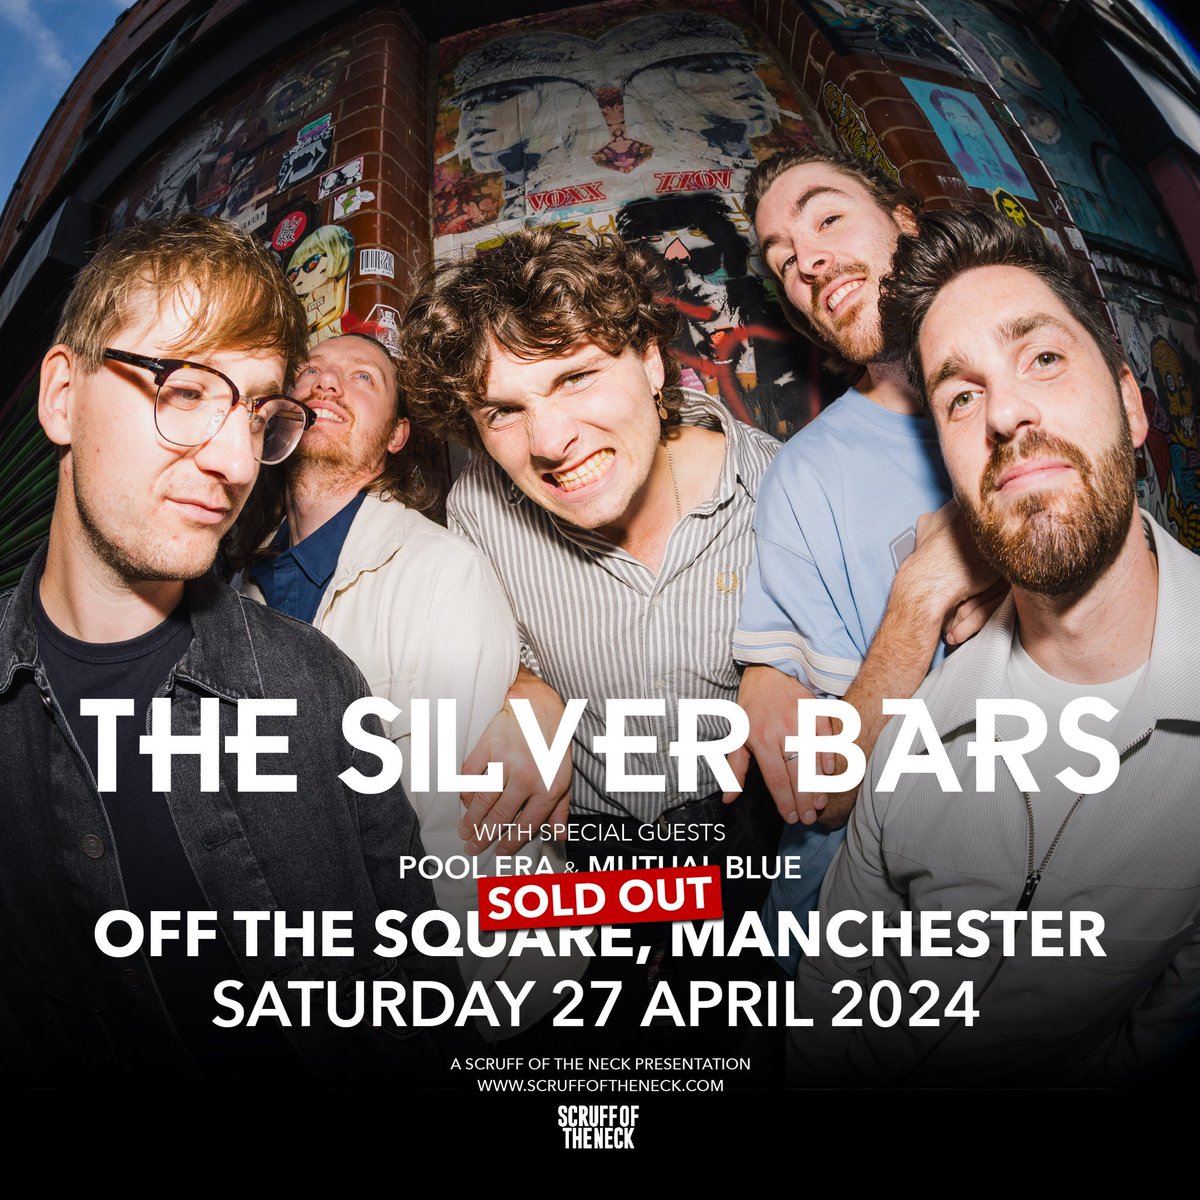 Manchester! Tonight is SOLD OUT!💥 Good times inbound. We shall see you there! x